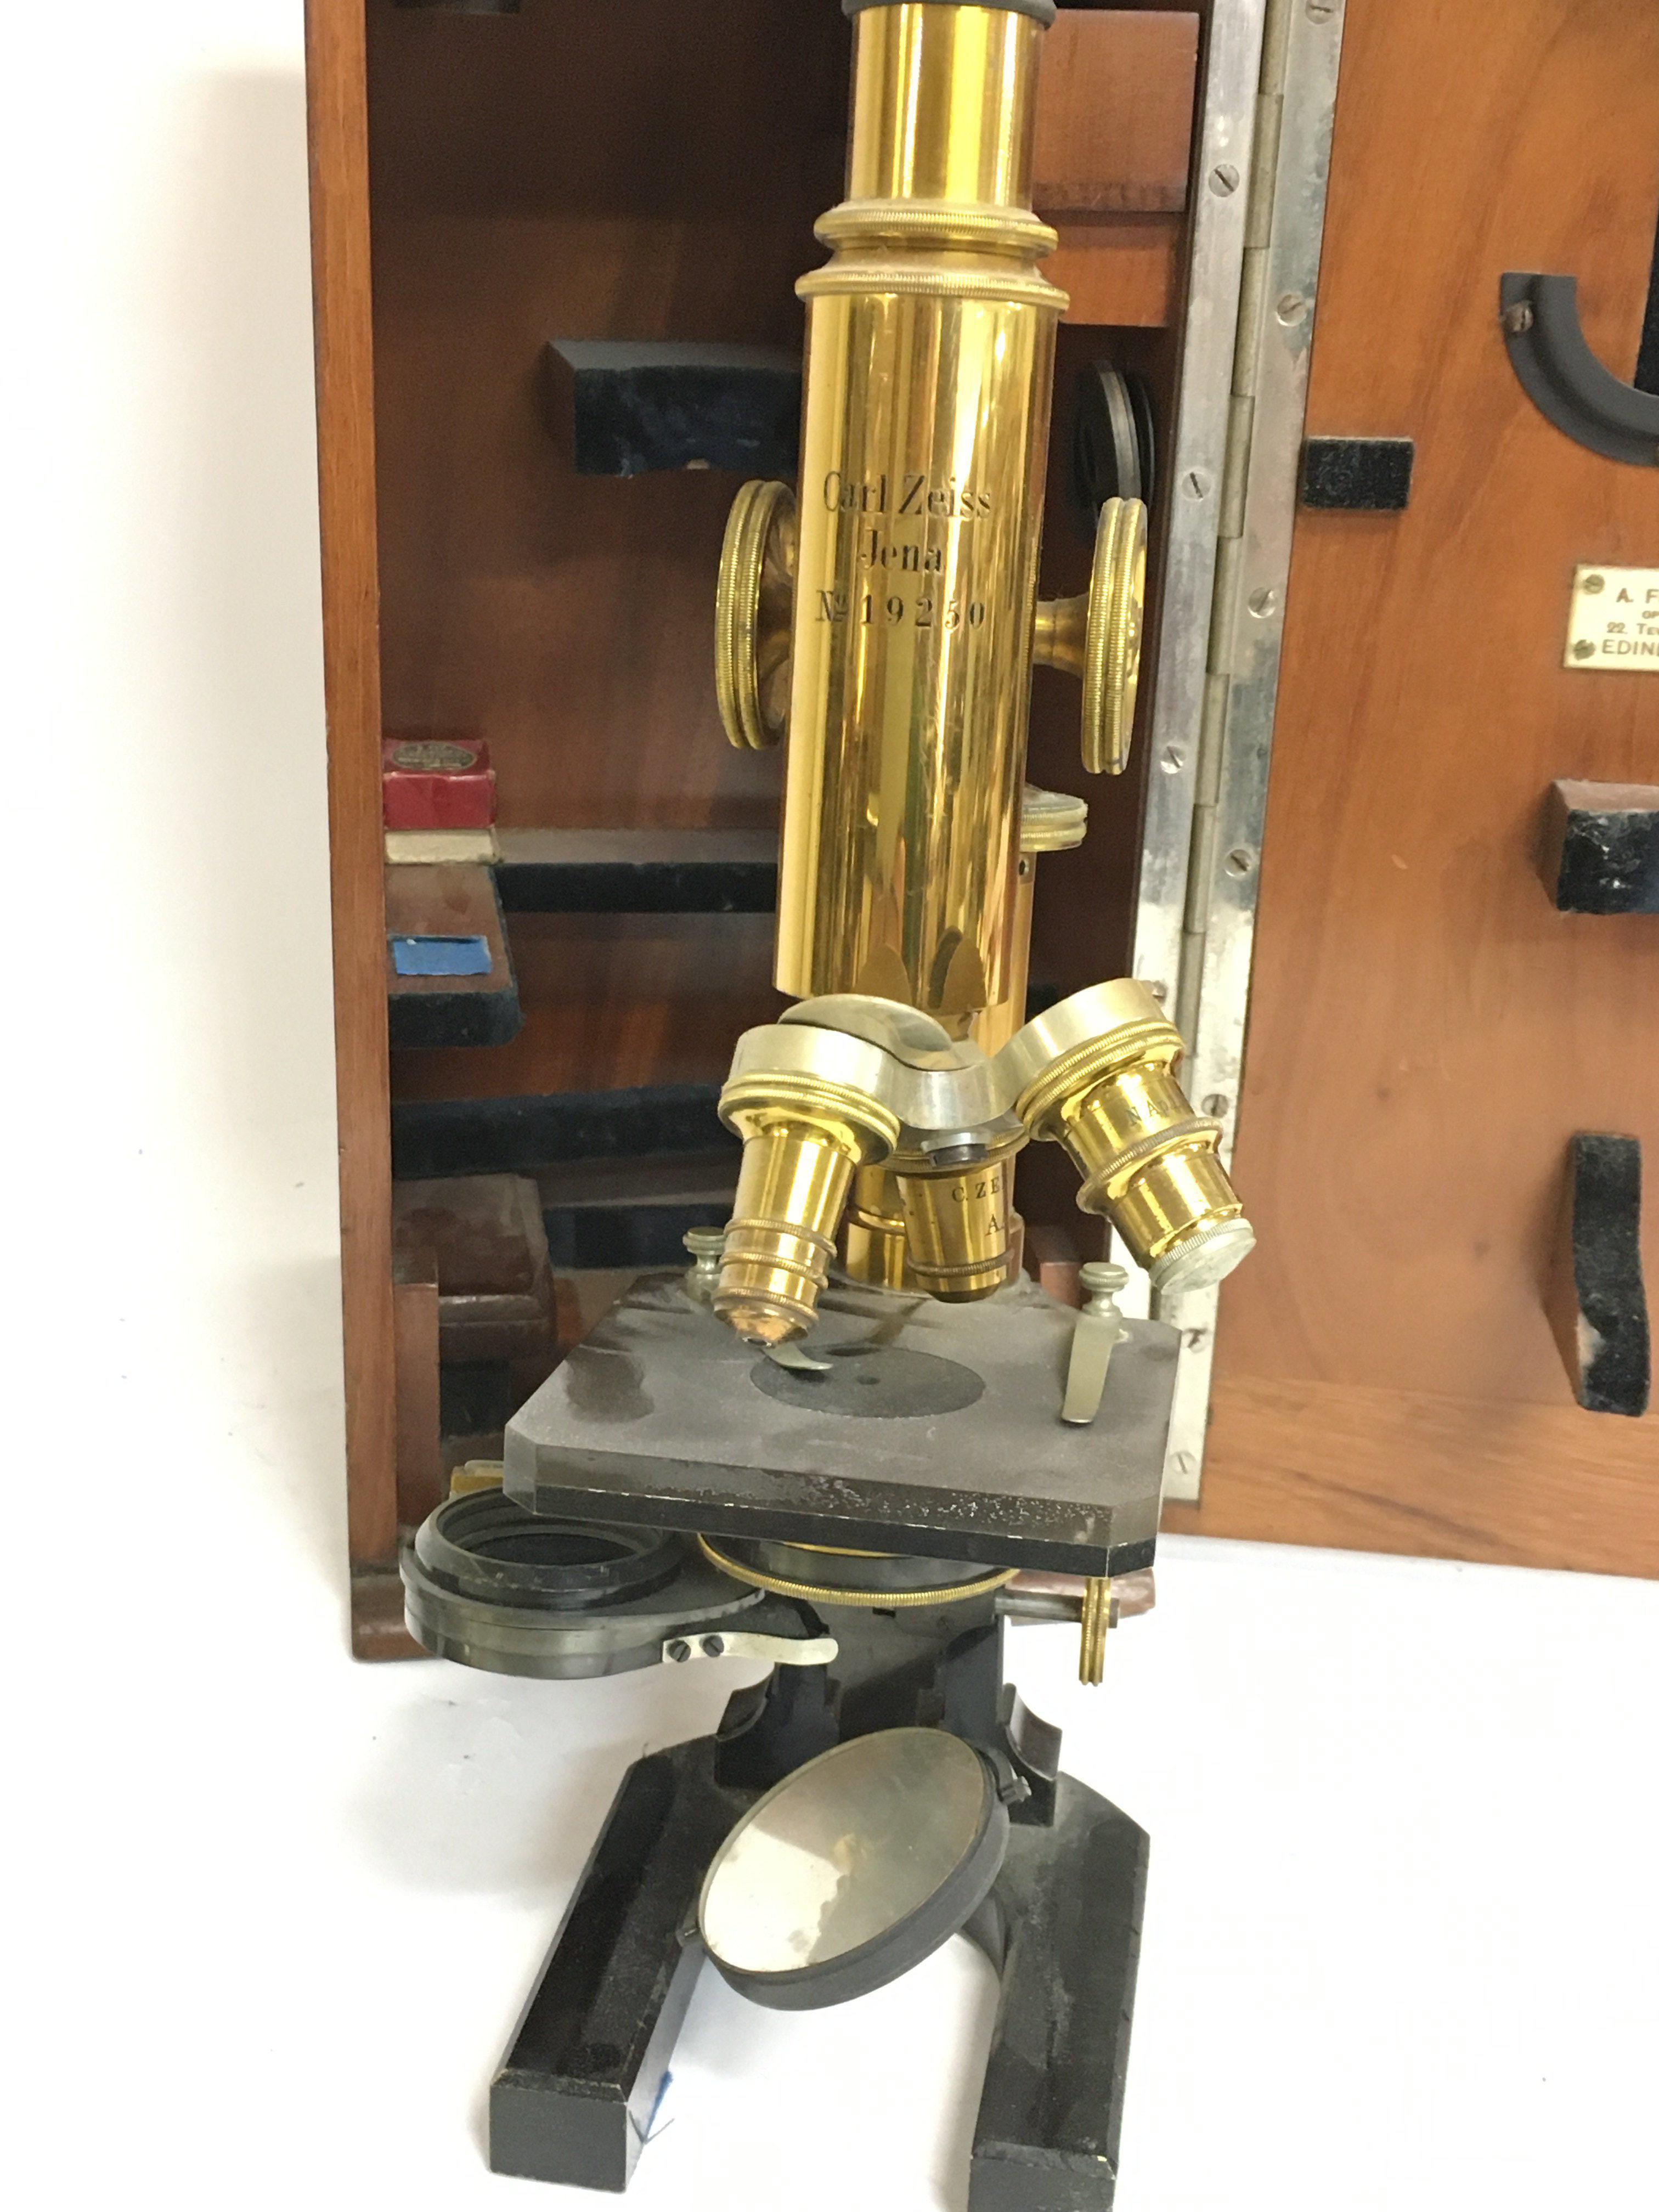 Carl Zeiss Jena No19250 cased microscope with a tr - Image 2 of 2